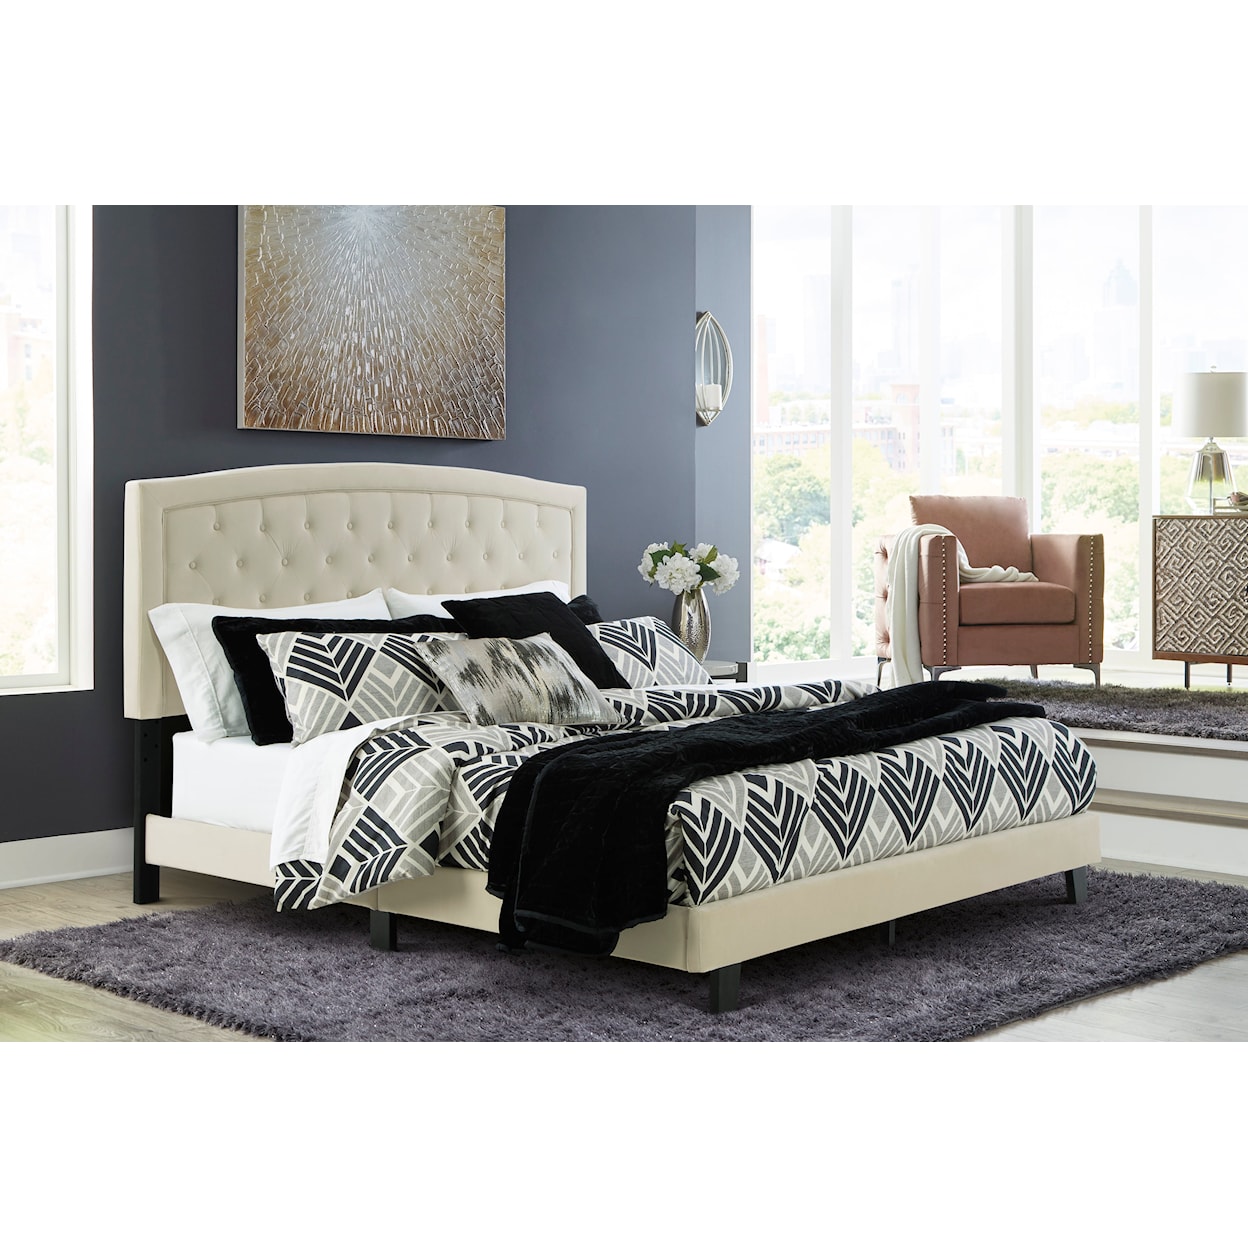 Benchcraft Adelloni King Upholstered Bed